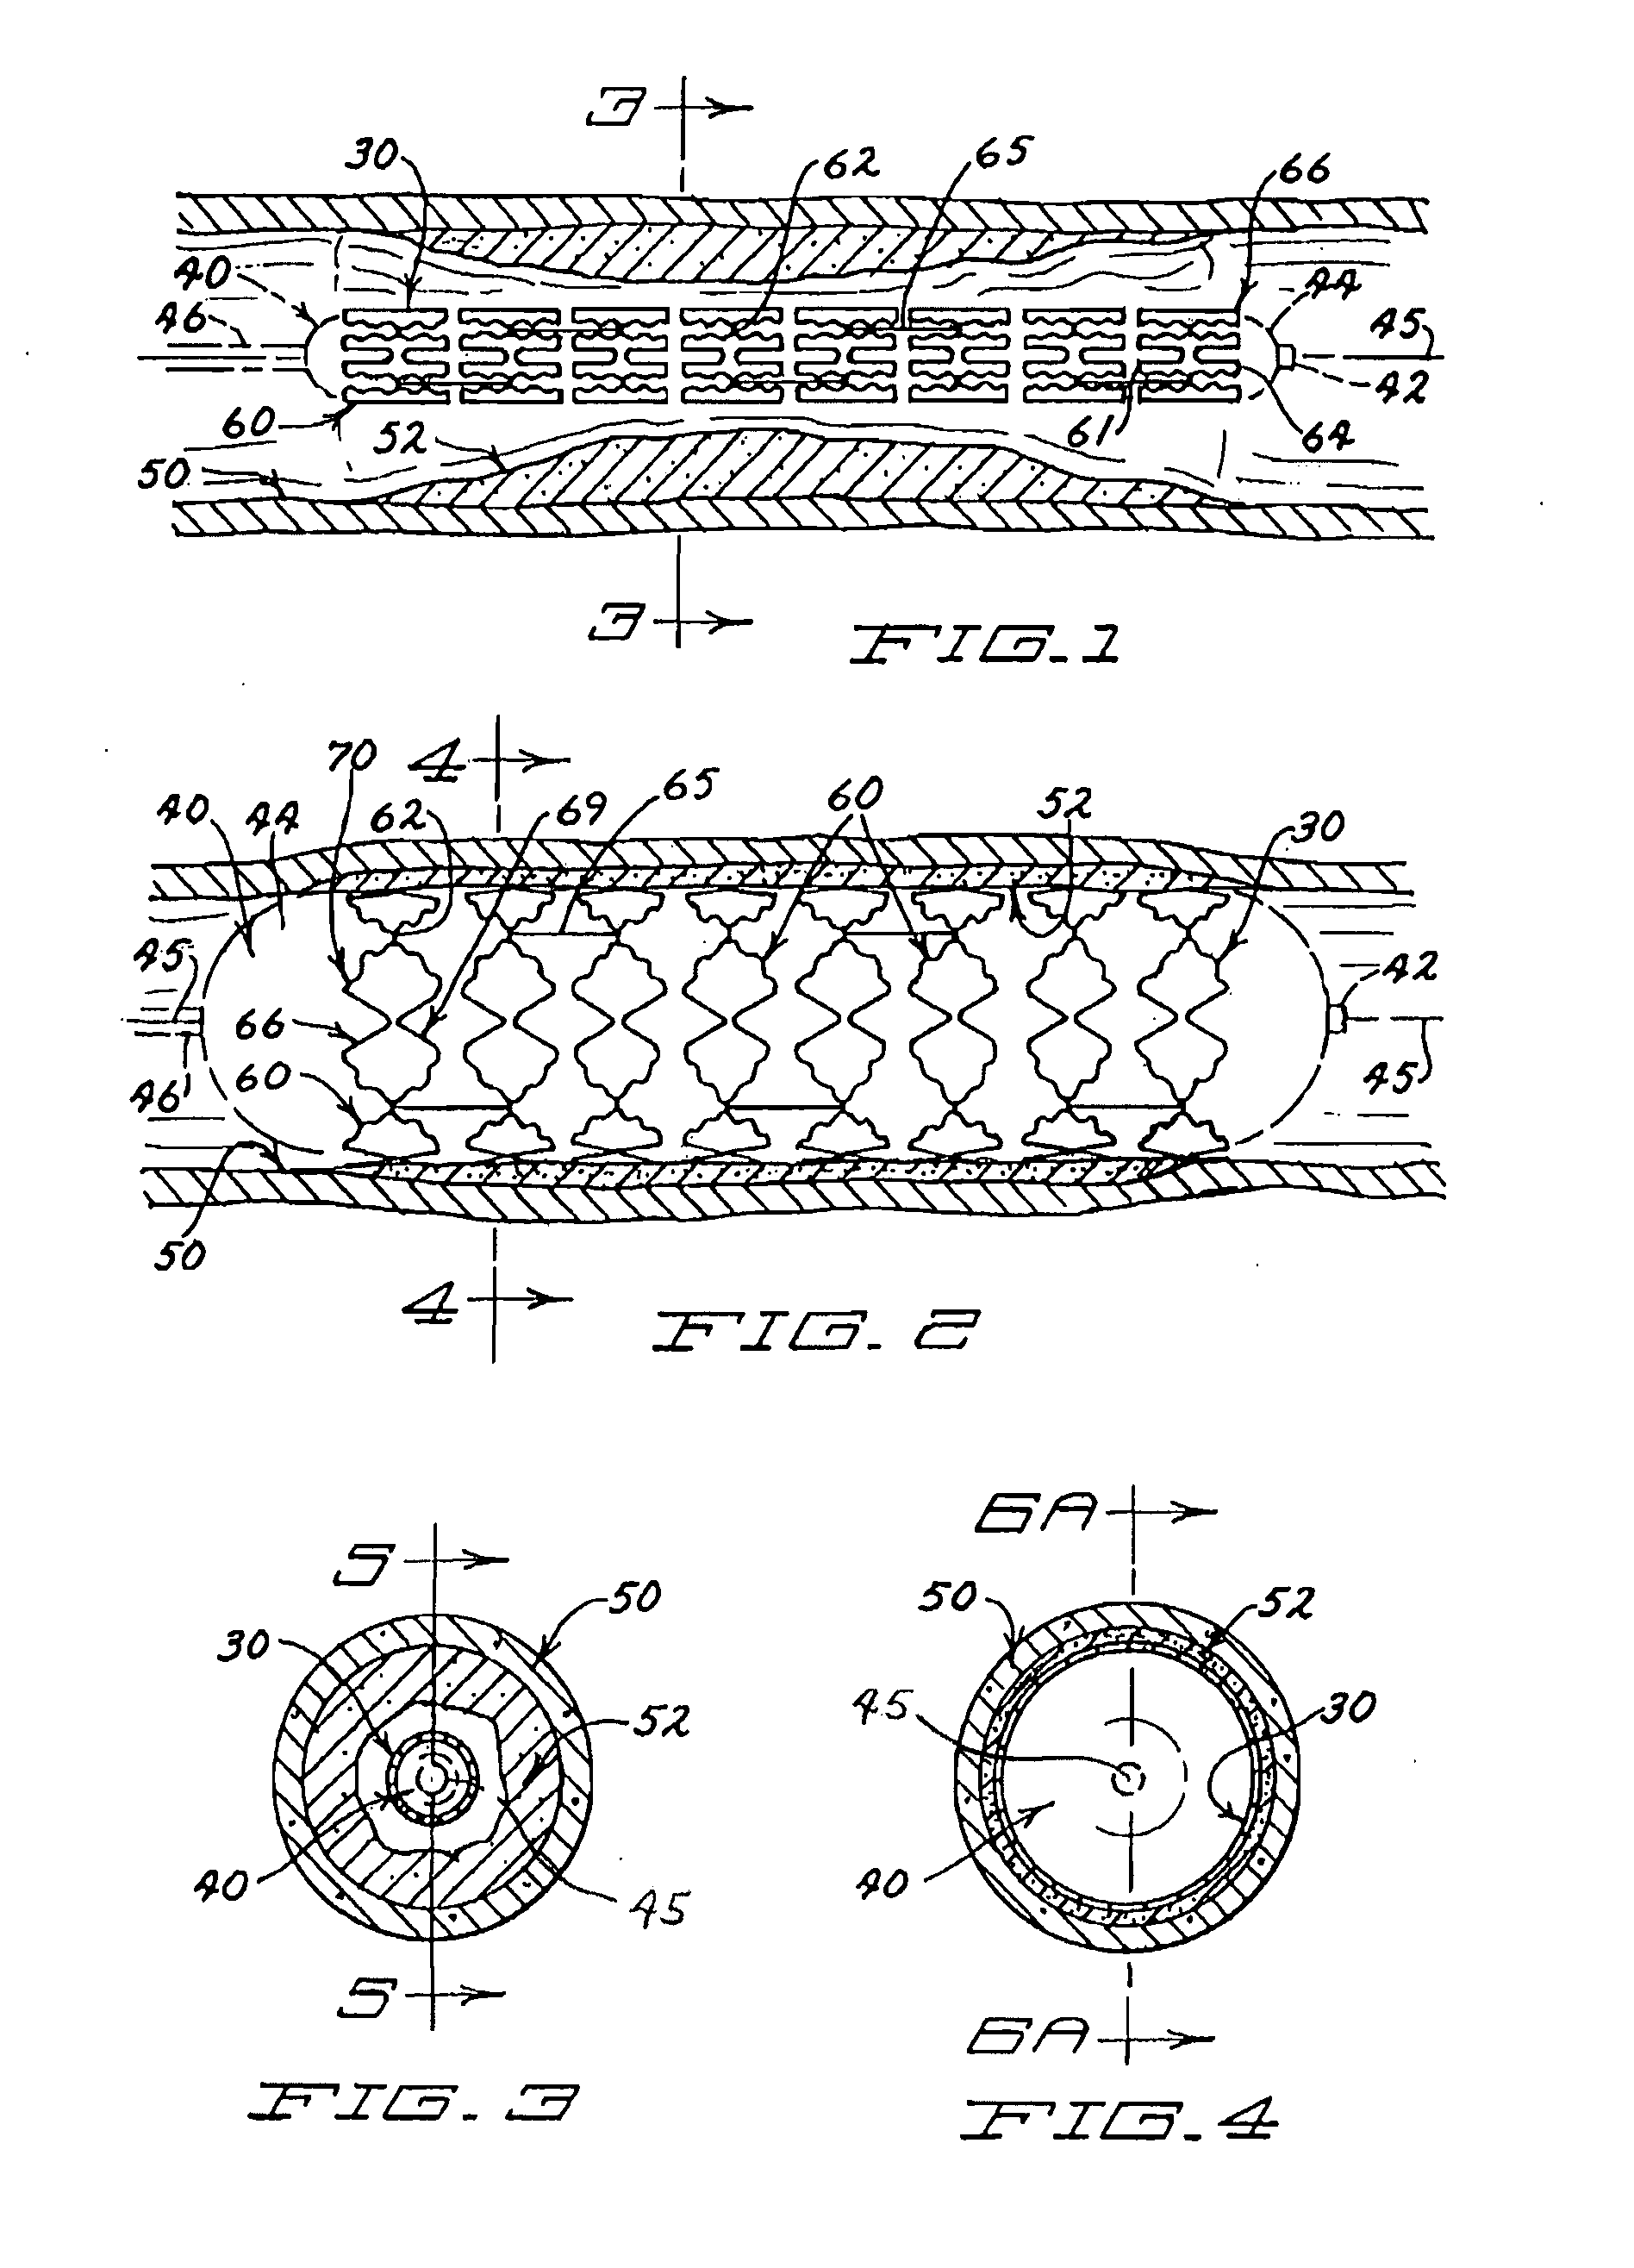 Expandable stent having a plurality of interconnected expansion modules